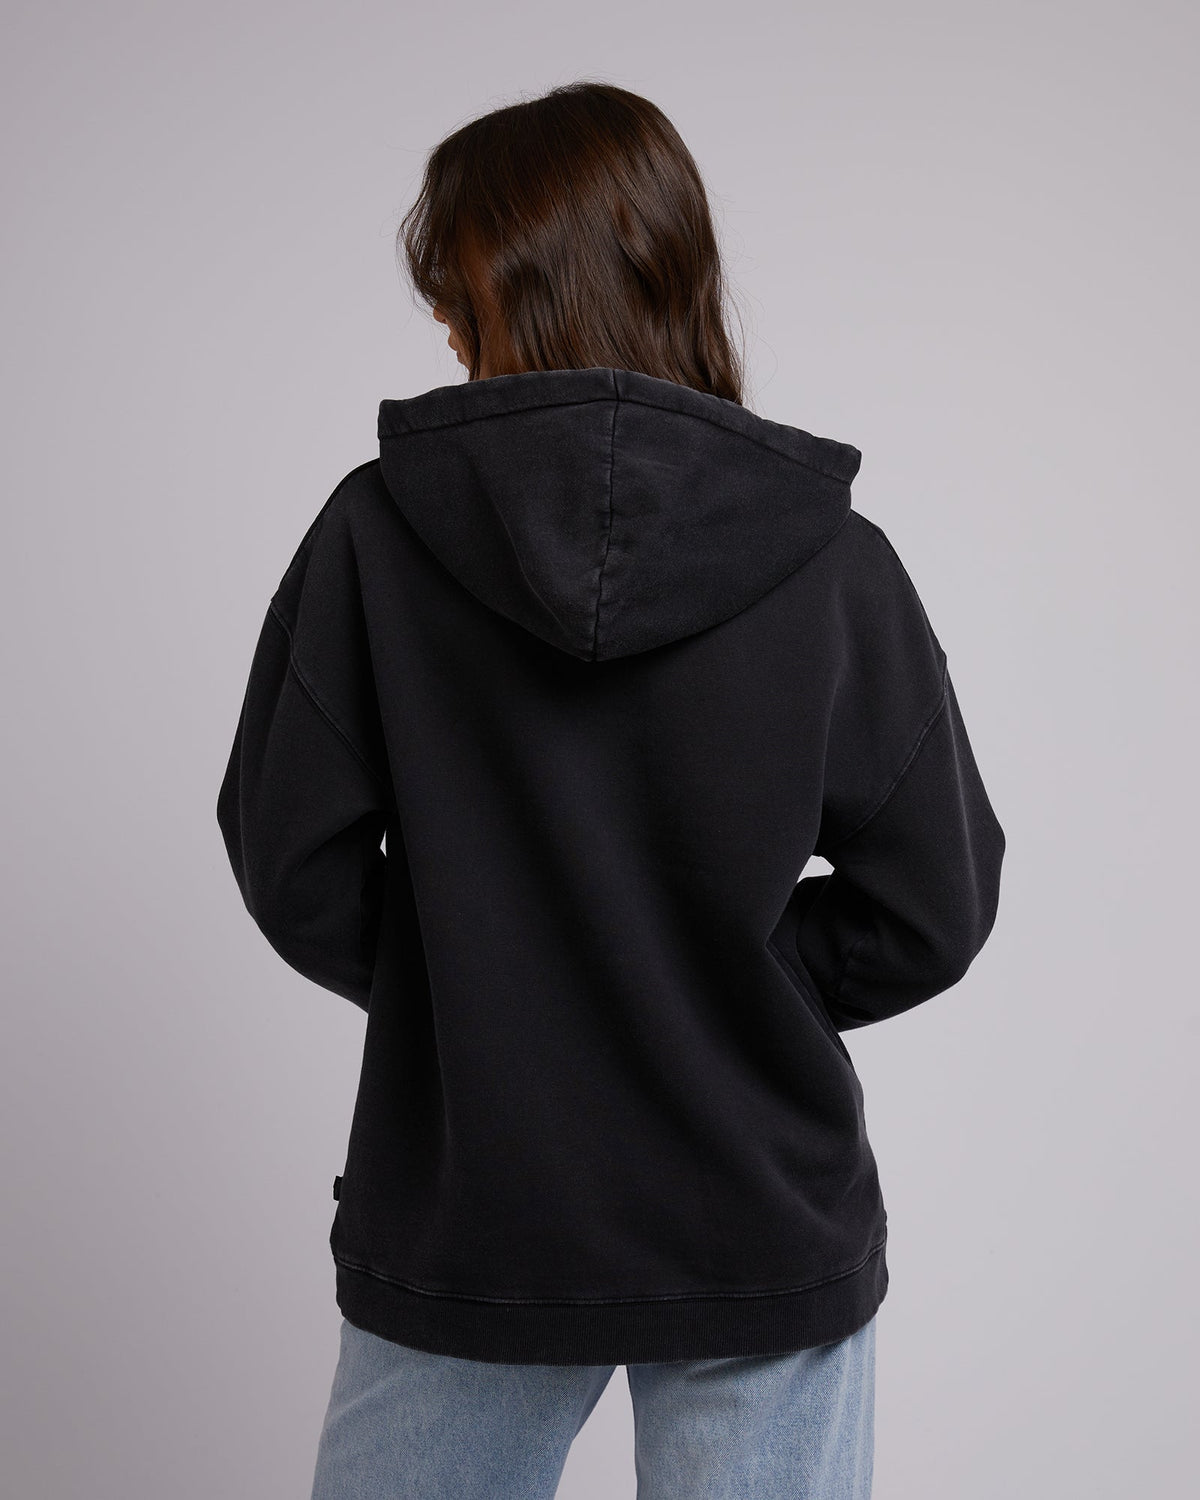 Silent Theory Ladies-Fearless Fly Hoody Washed Black-Edge Clothing